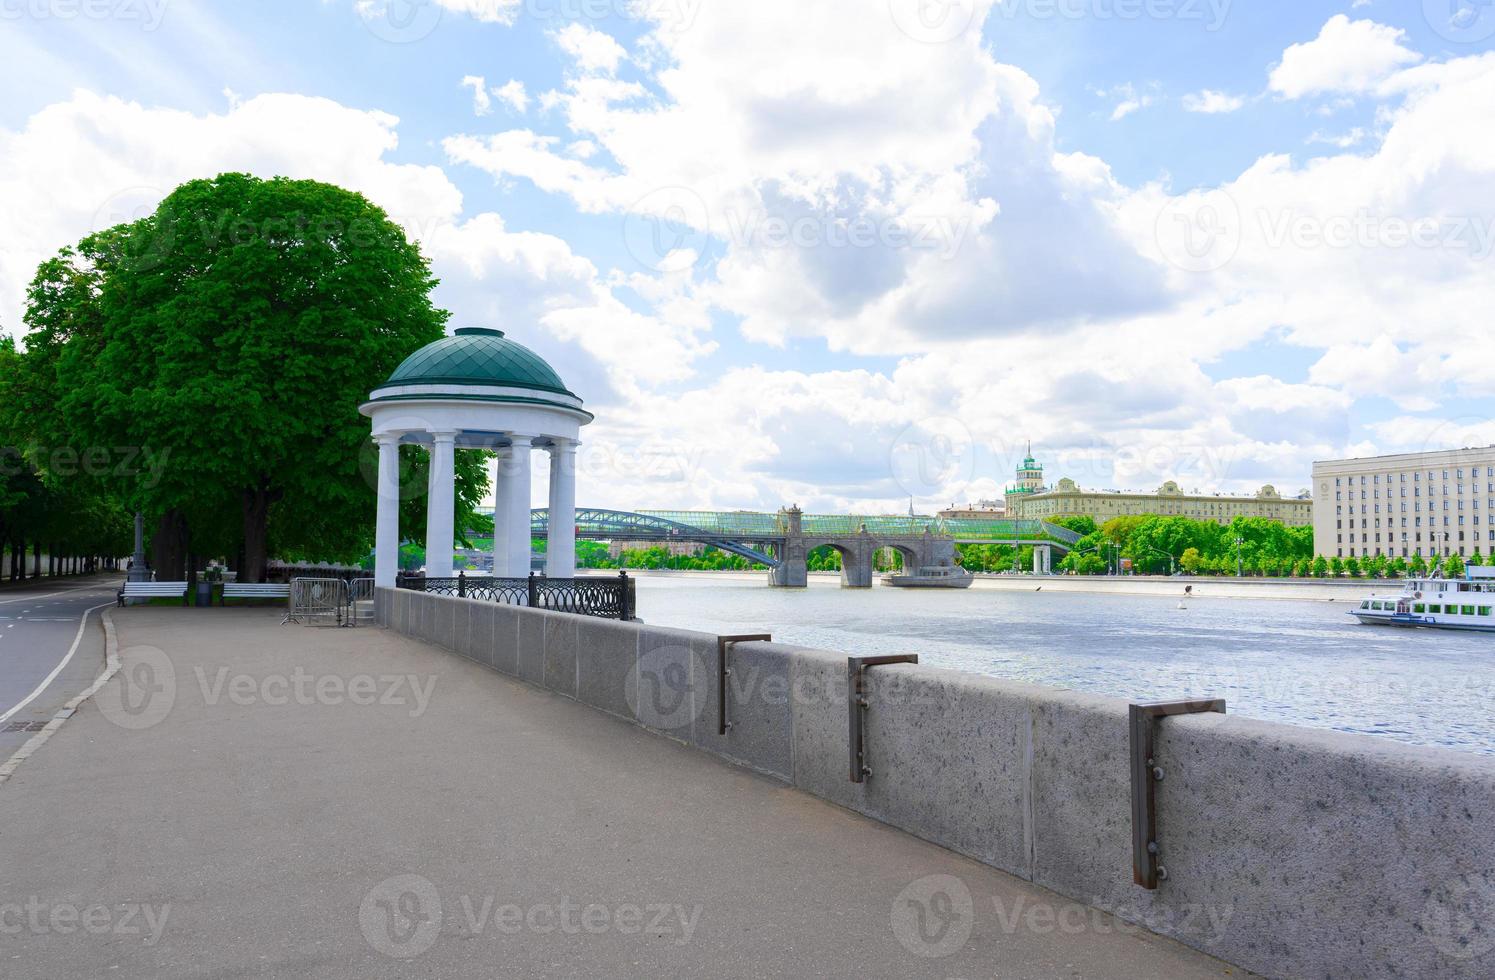 Moscow spring 2021 Andreevsky Bridge over the Moscow River. Gorky Park Rotunda on the embankment. photo